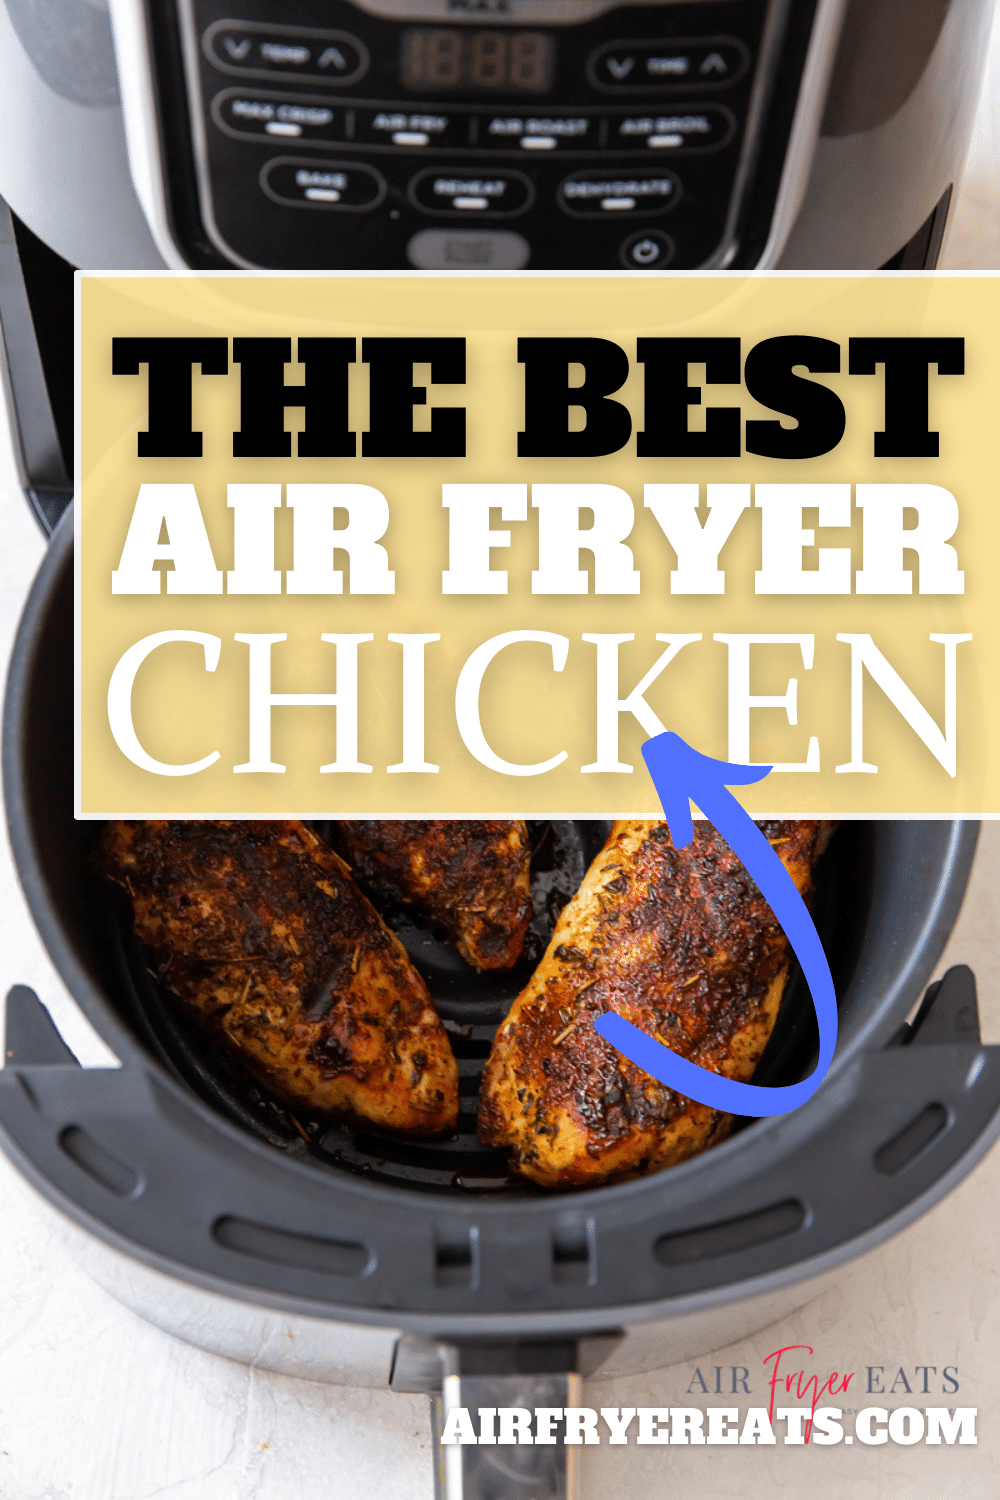 Learn how to make air fryer chicken breast that is juicy, tender, and packed full of flavor! This chicken breast in the air fryer will change the way you make dinner. #airfryerchicken via @vegetarianmamma